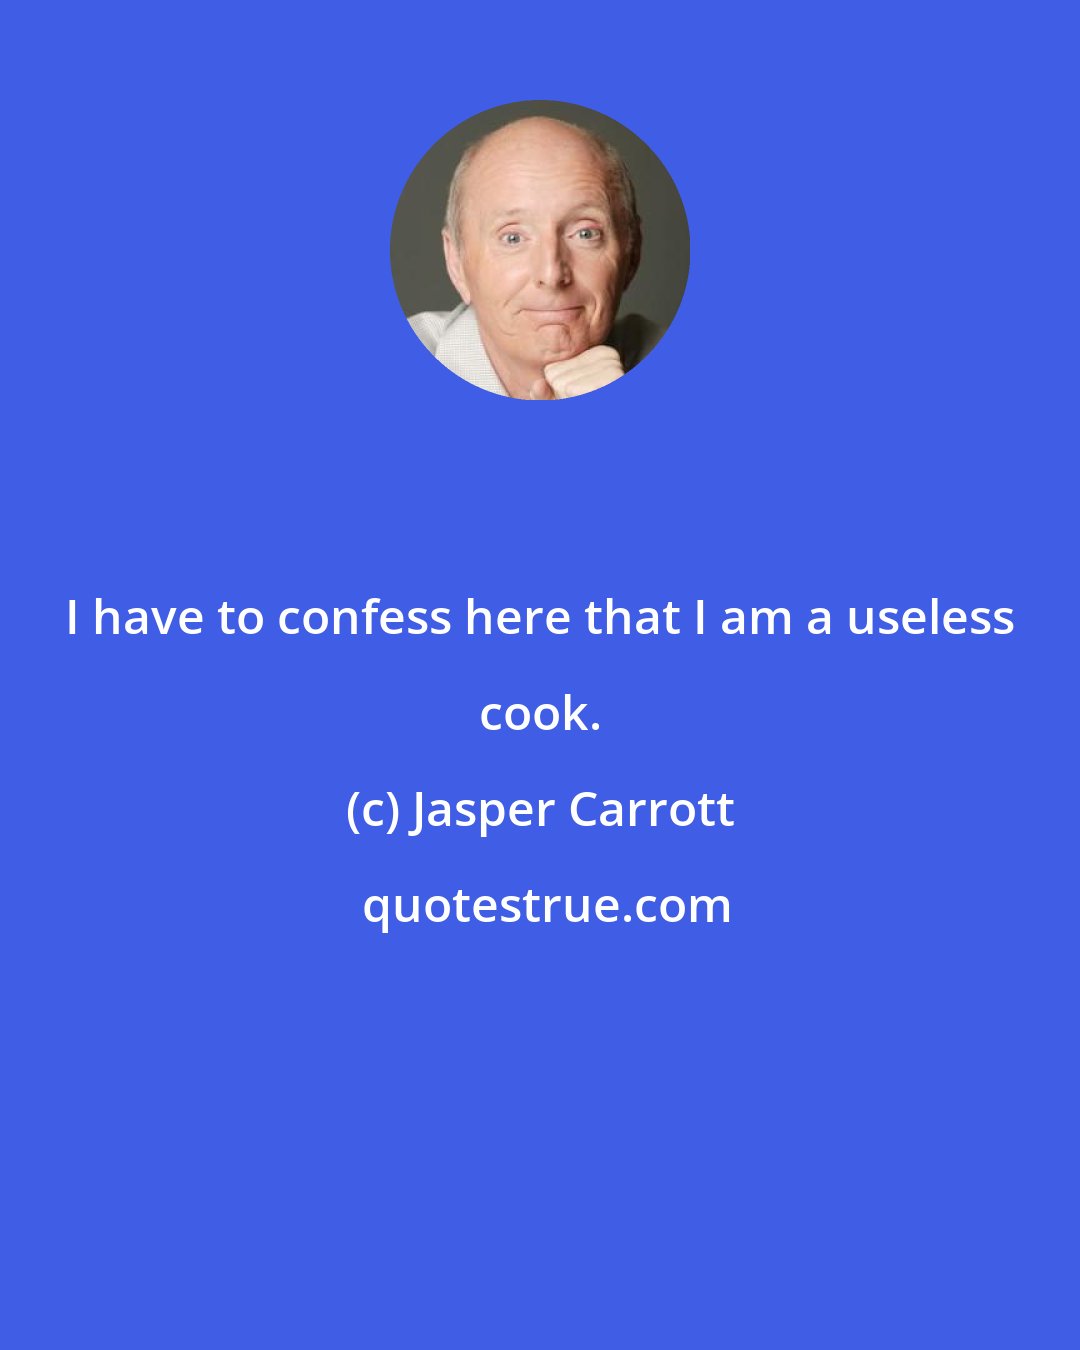 Jasper Carrott: I have to confess here that I am a useless cook.